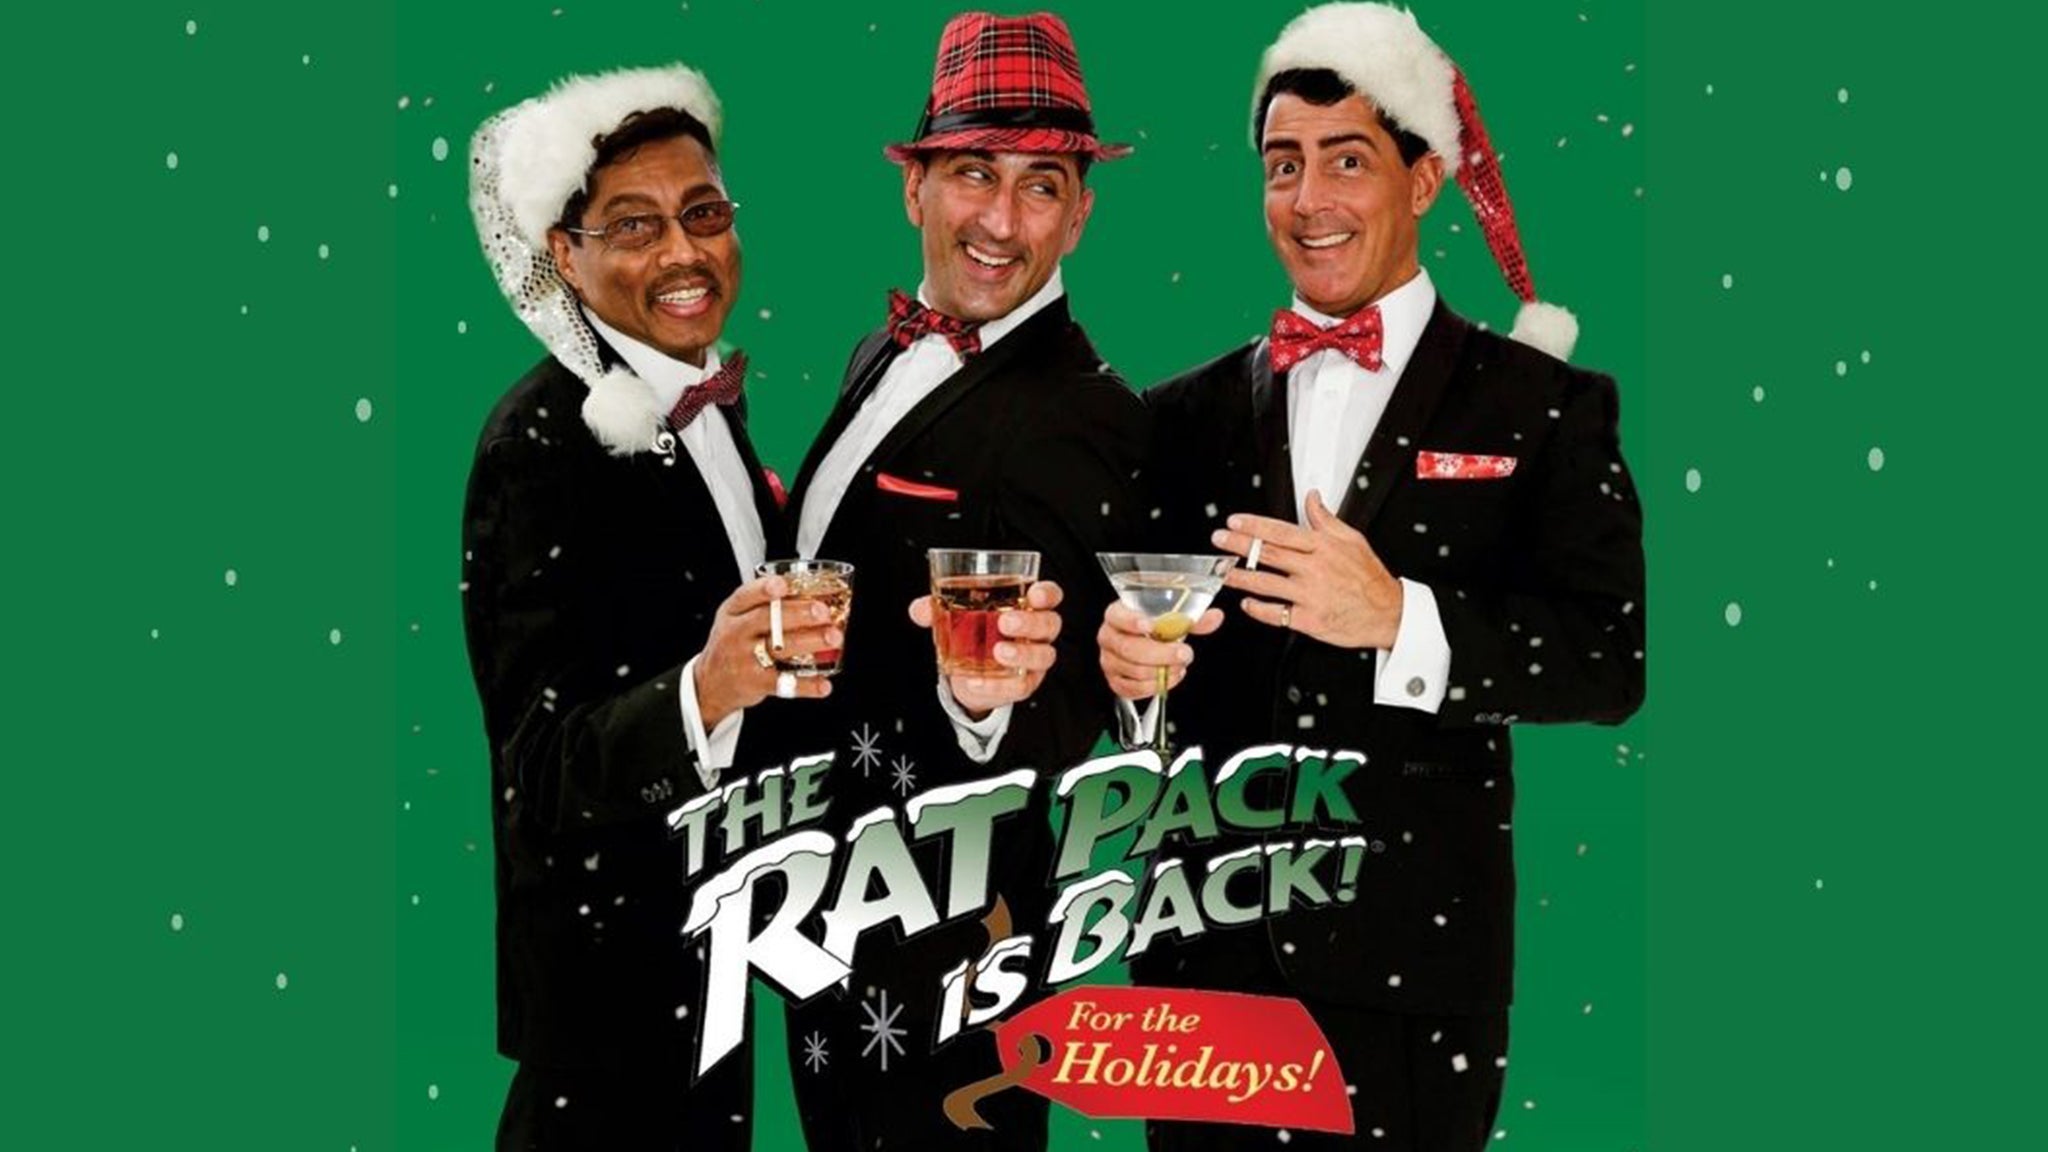 The Rat Pack is Back for The Holidays! at The Lerner Theatre